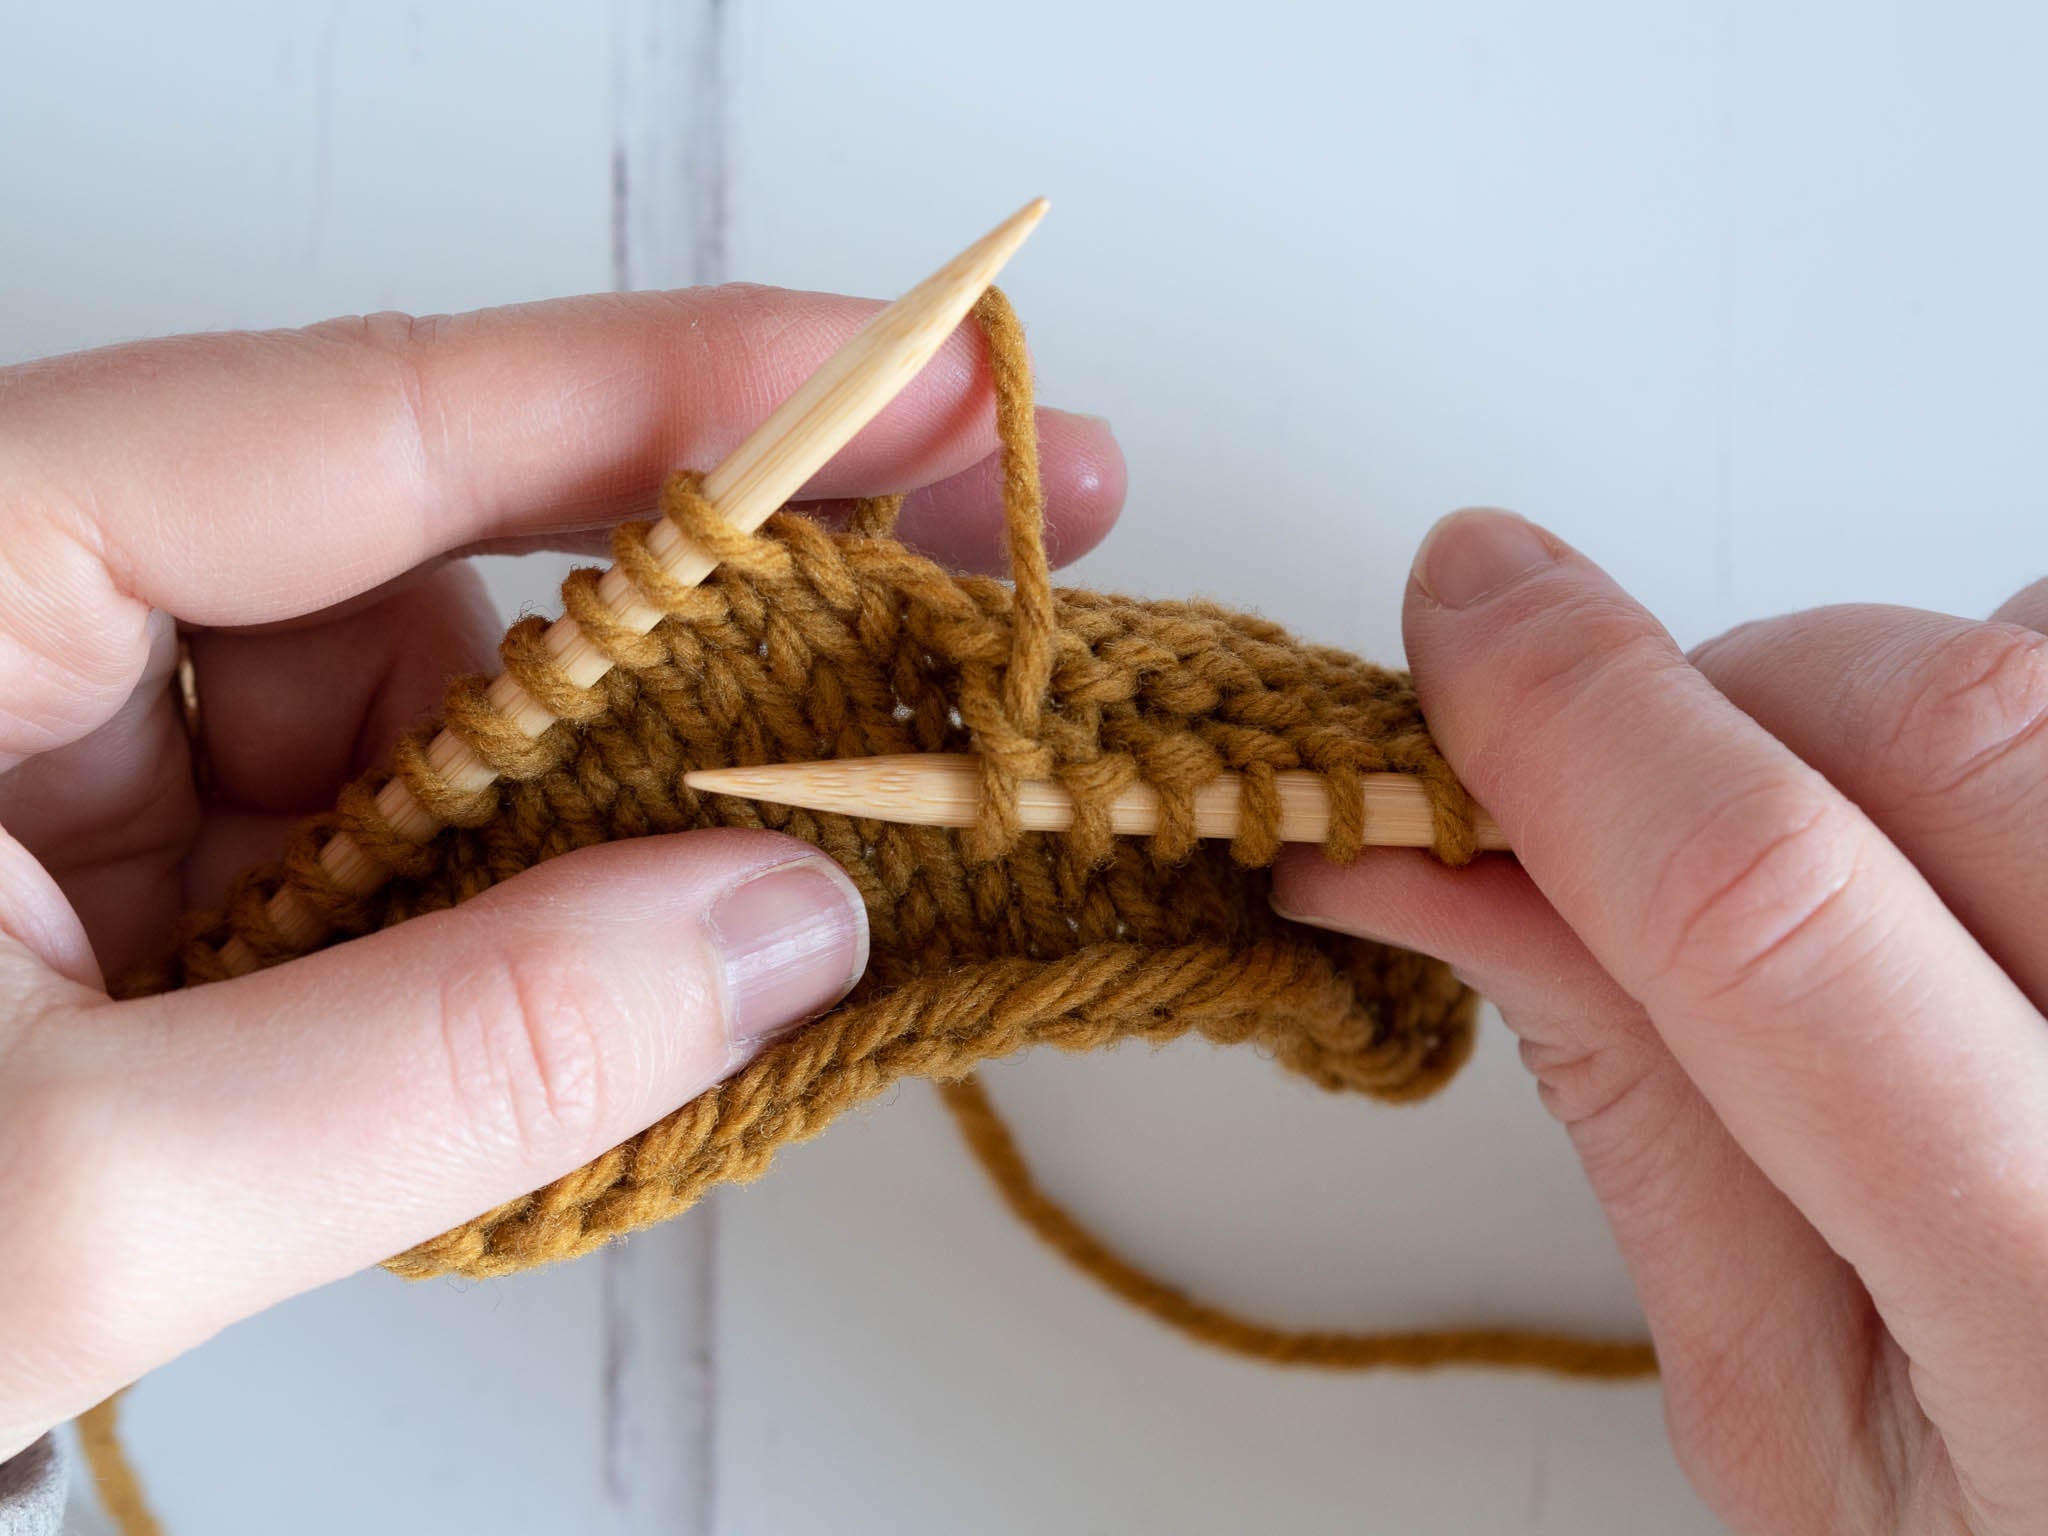 How to Tell if it was a Knit or Purl? – Cushion of Joy